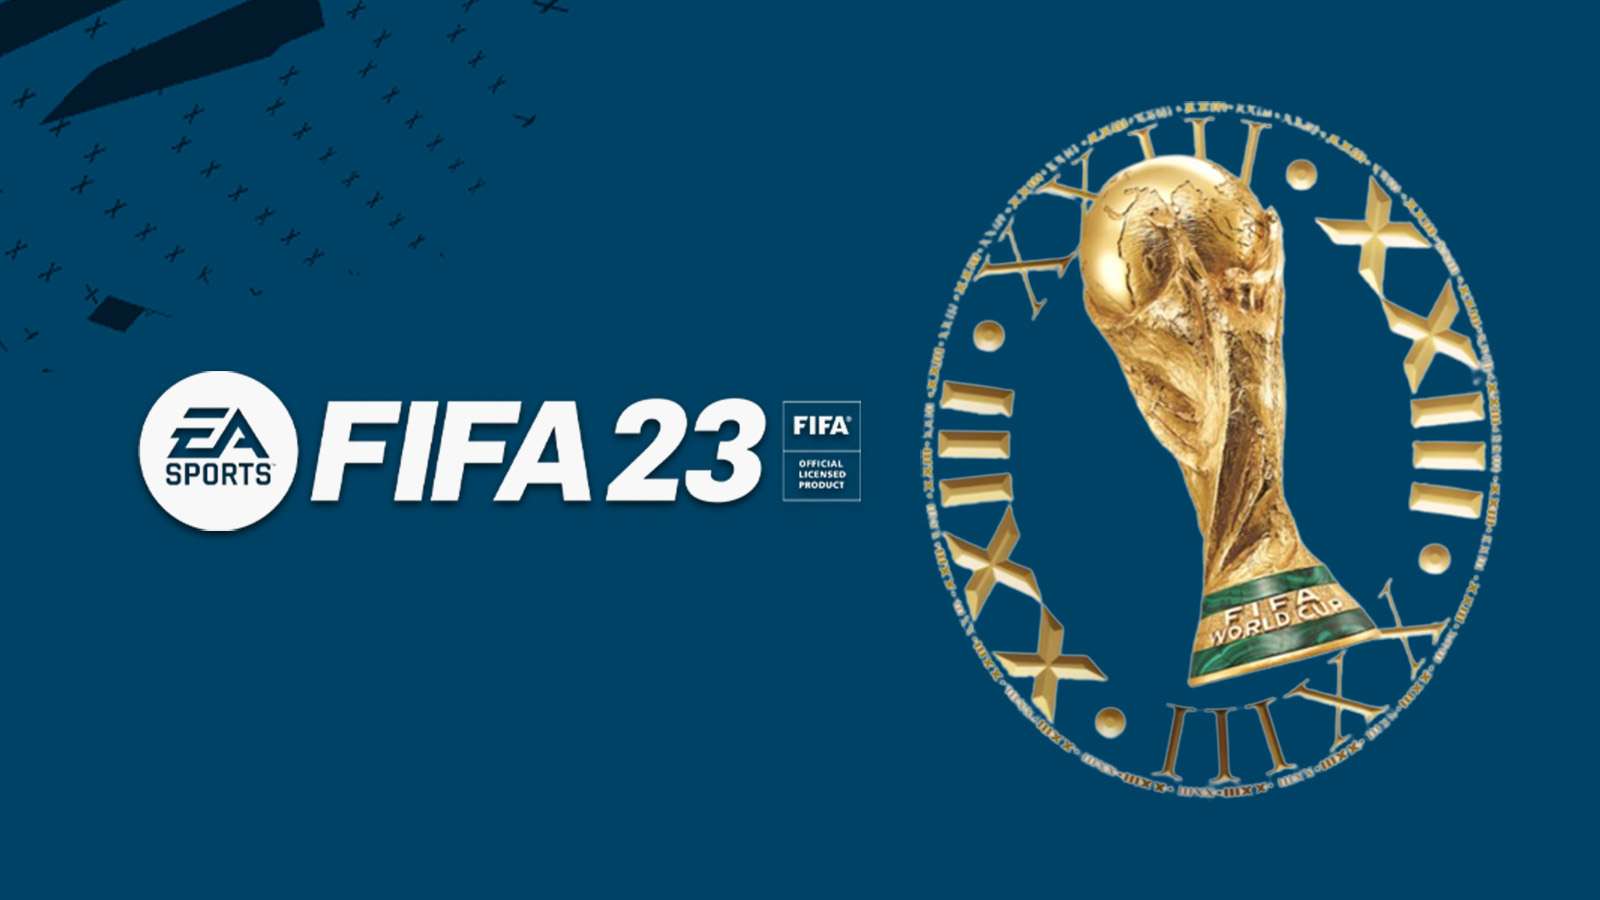 FIFA 23 logo and World Cup event logo on blue background